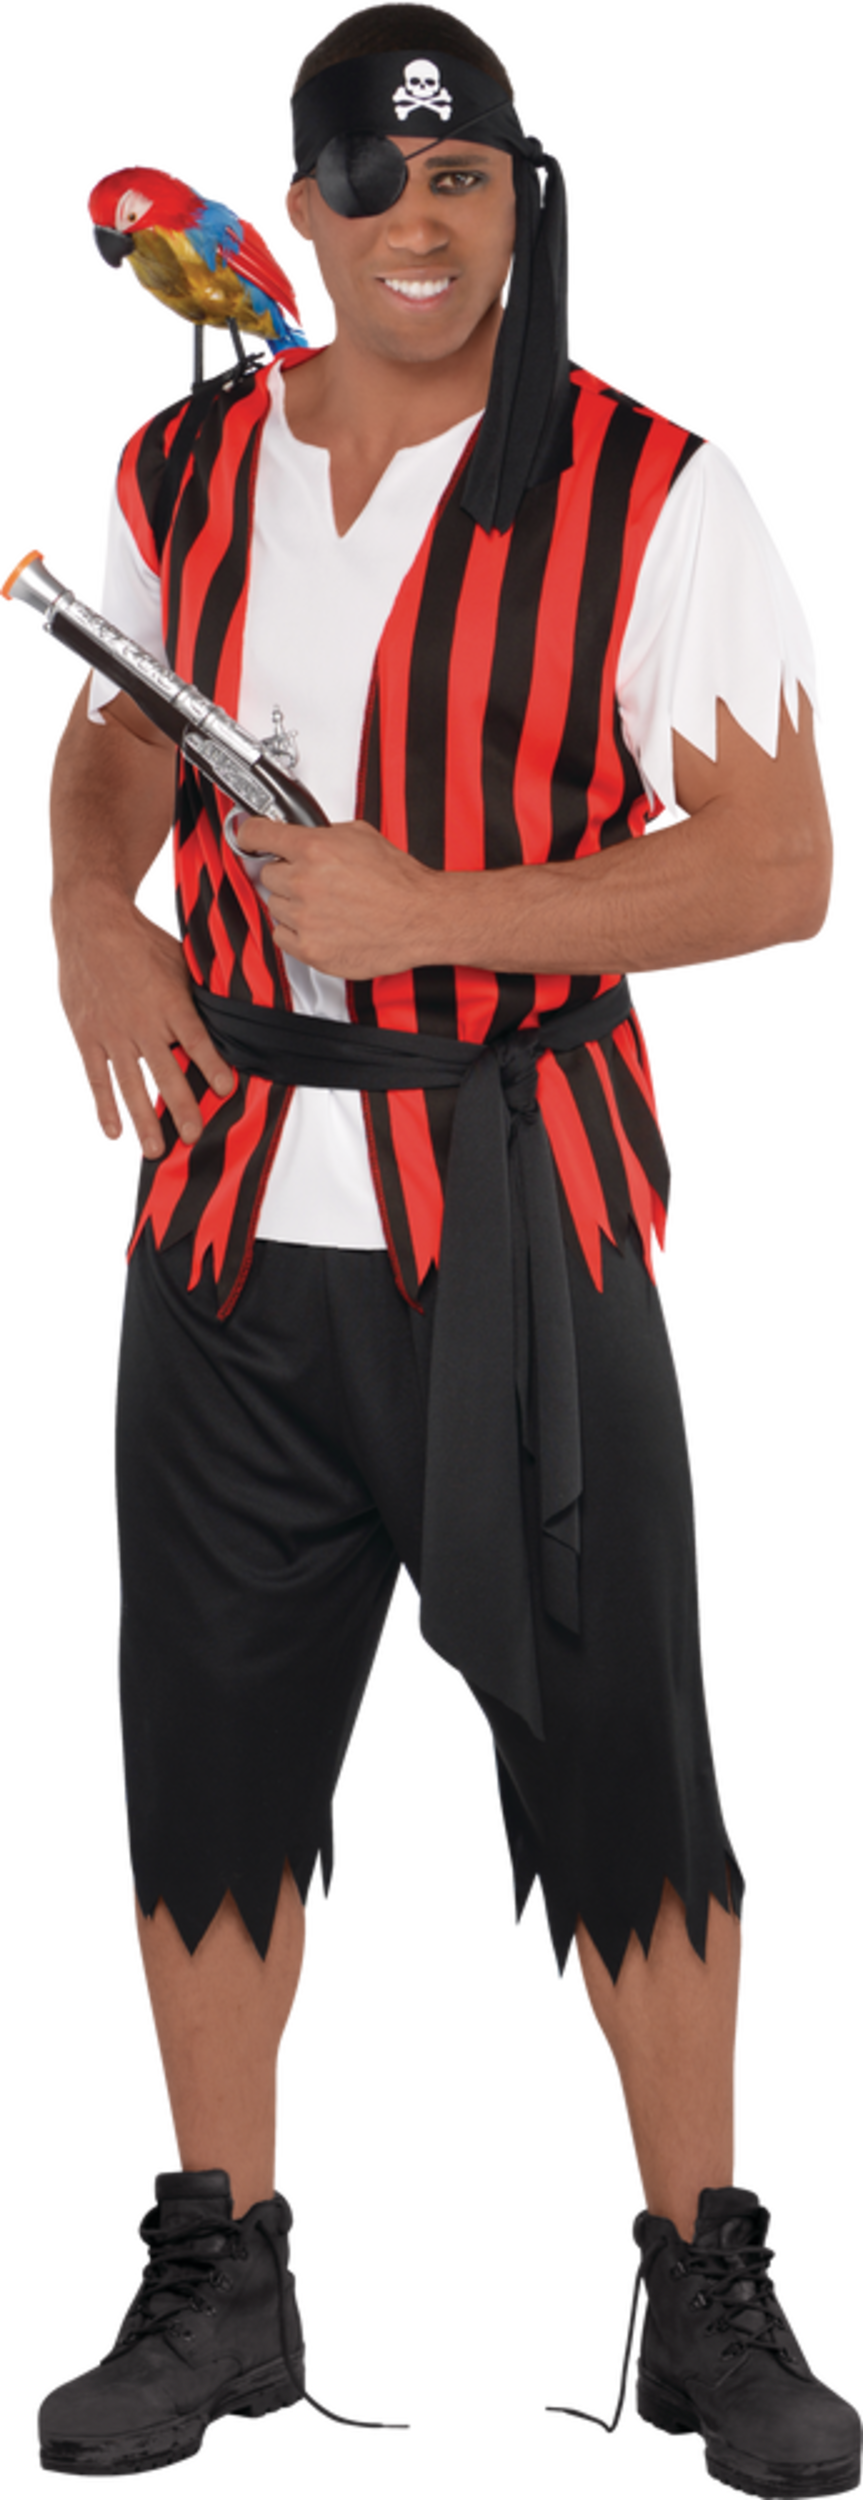 Mens Ahoy Matey Pirate Blackred Striped Outfit With Shirtpantsbandana Halloween Costume One 8139